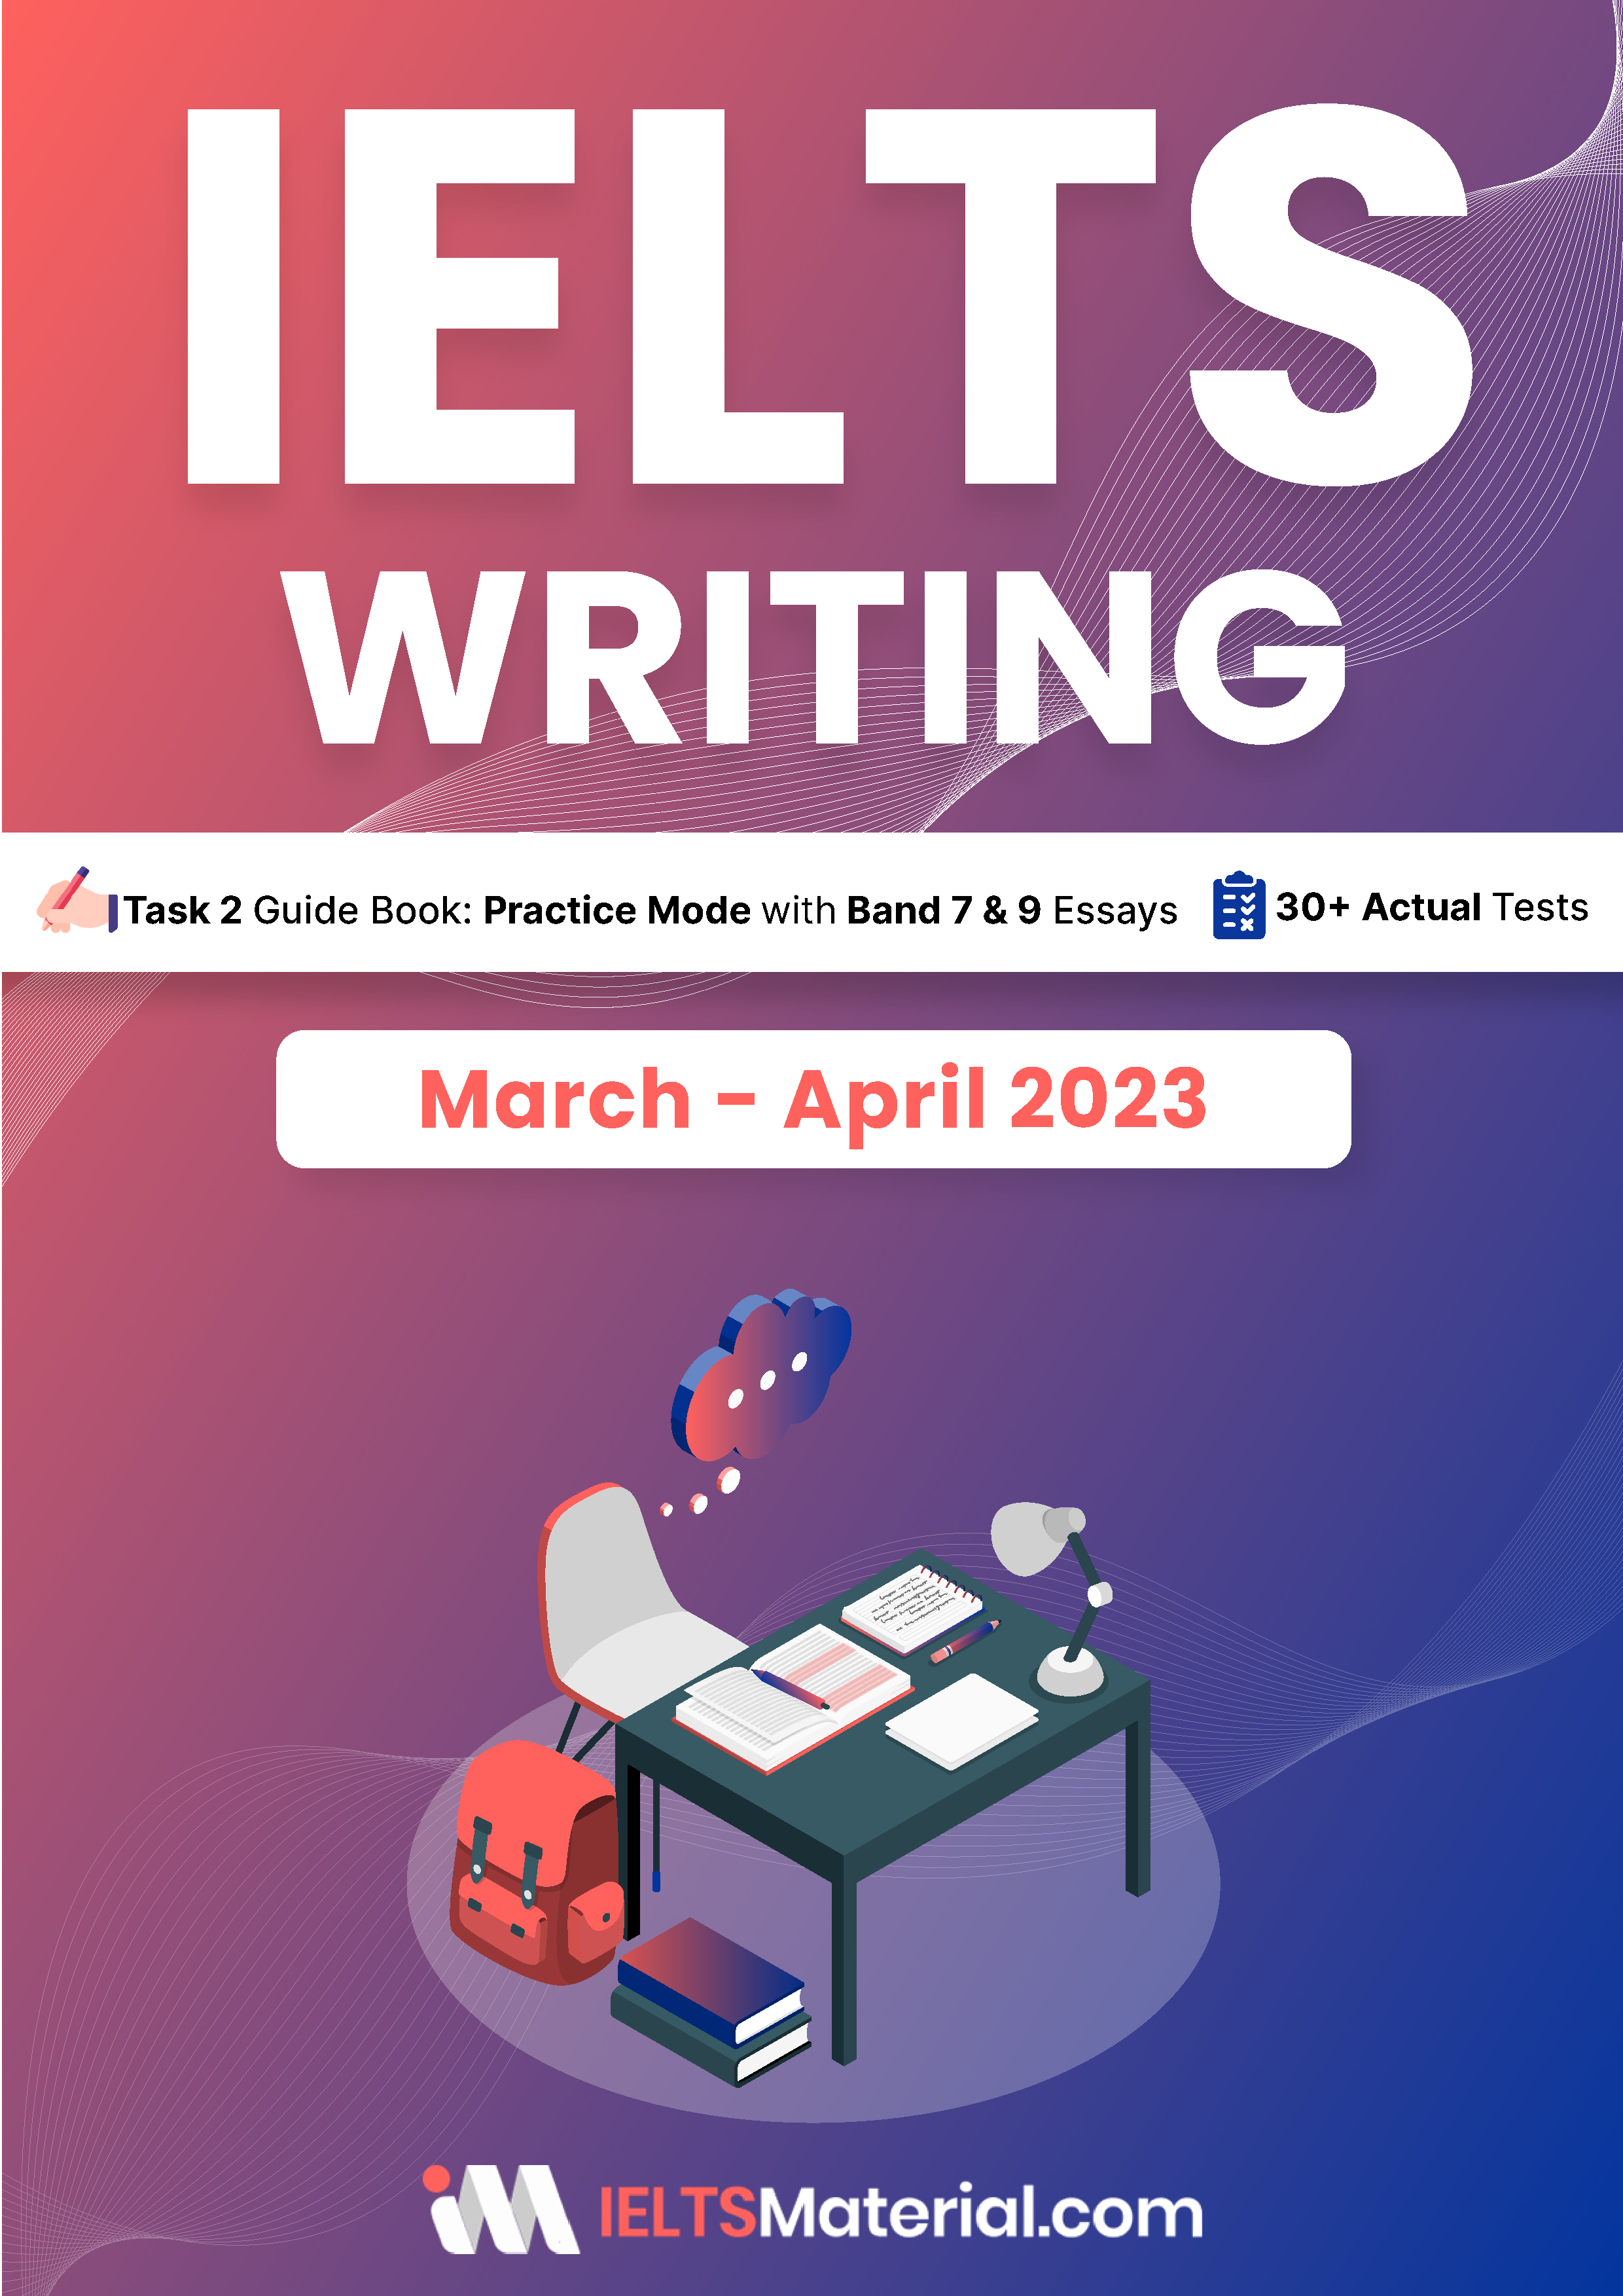 Comprehensive IELTS Writing (General) Band 8 Preparation Course